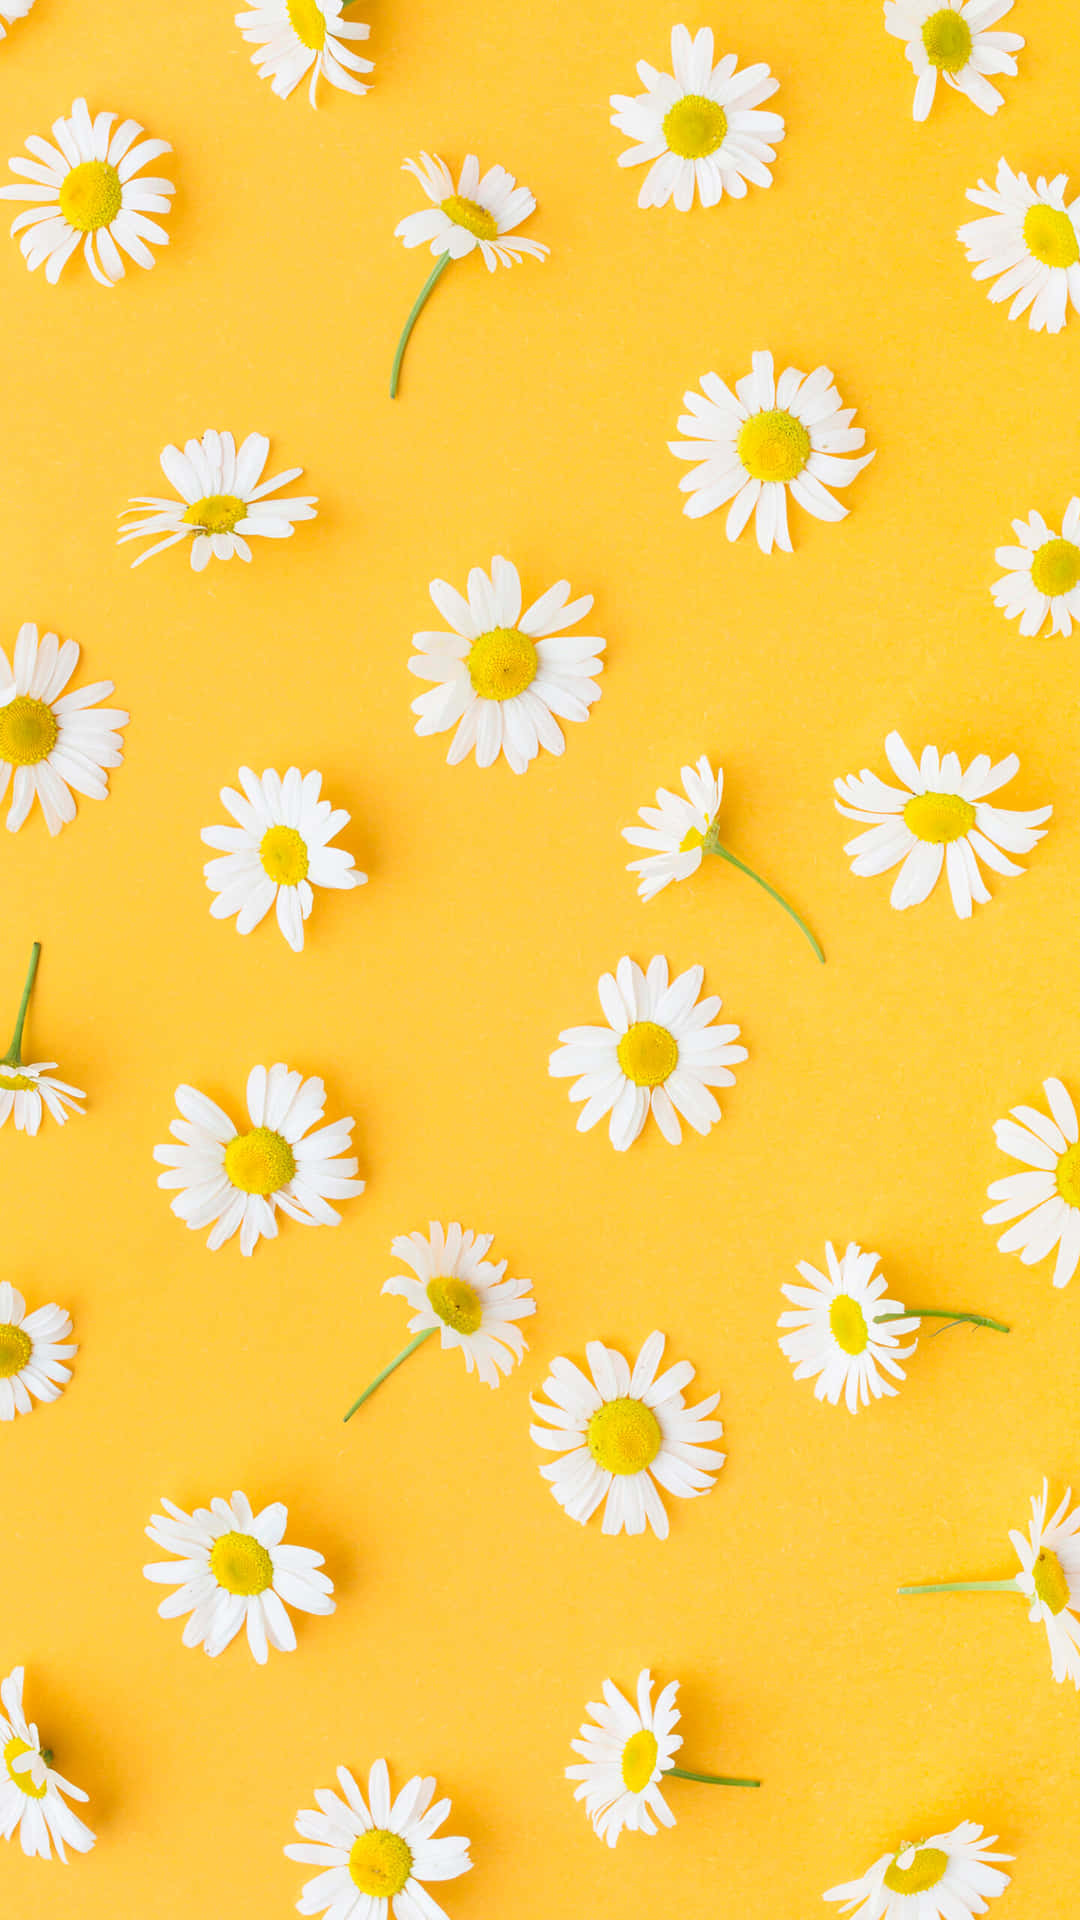 Yellow Daisy Aesthetic Pictures